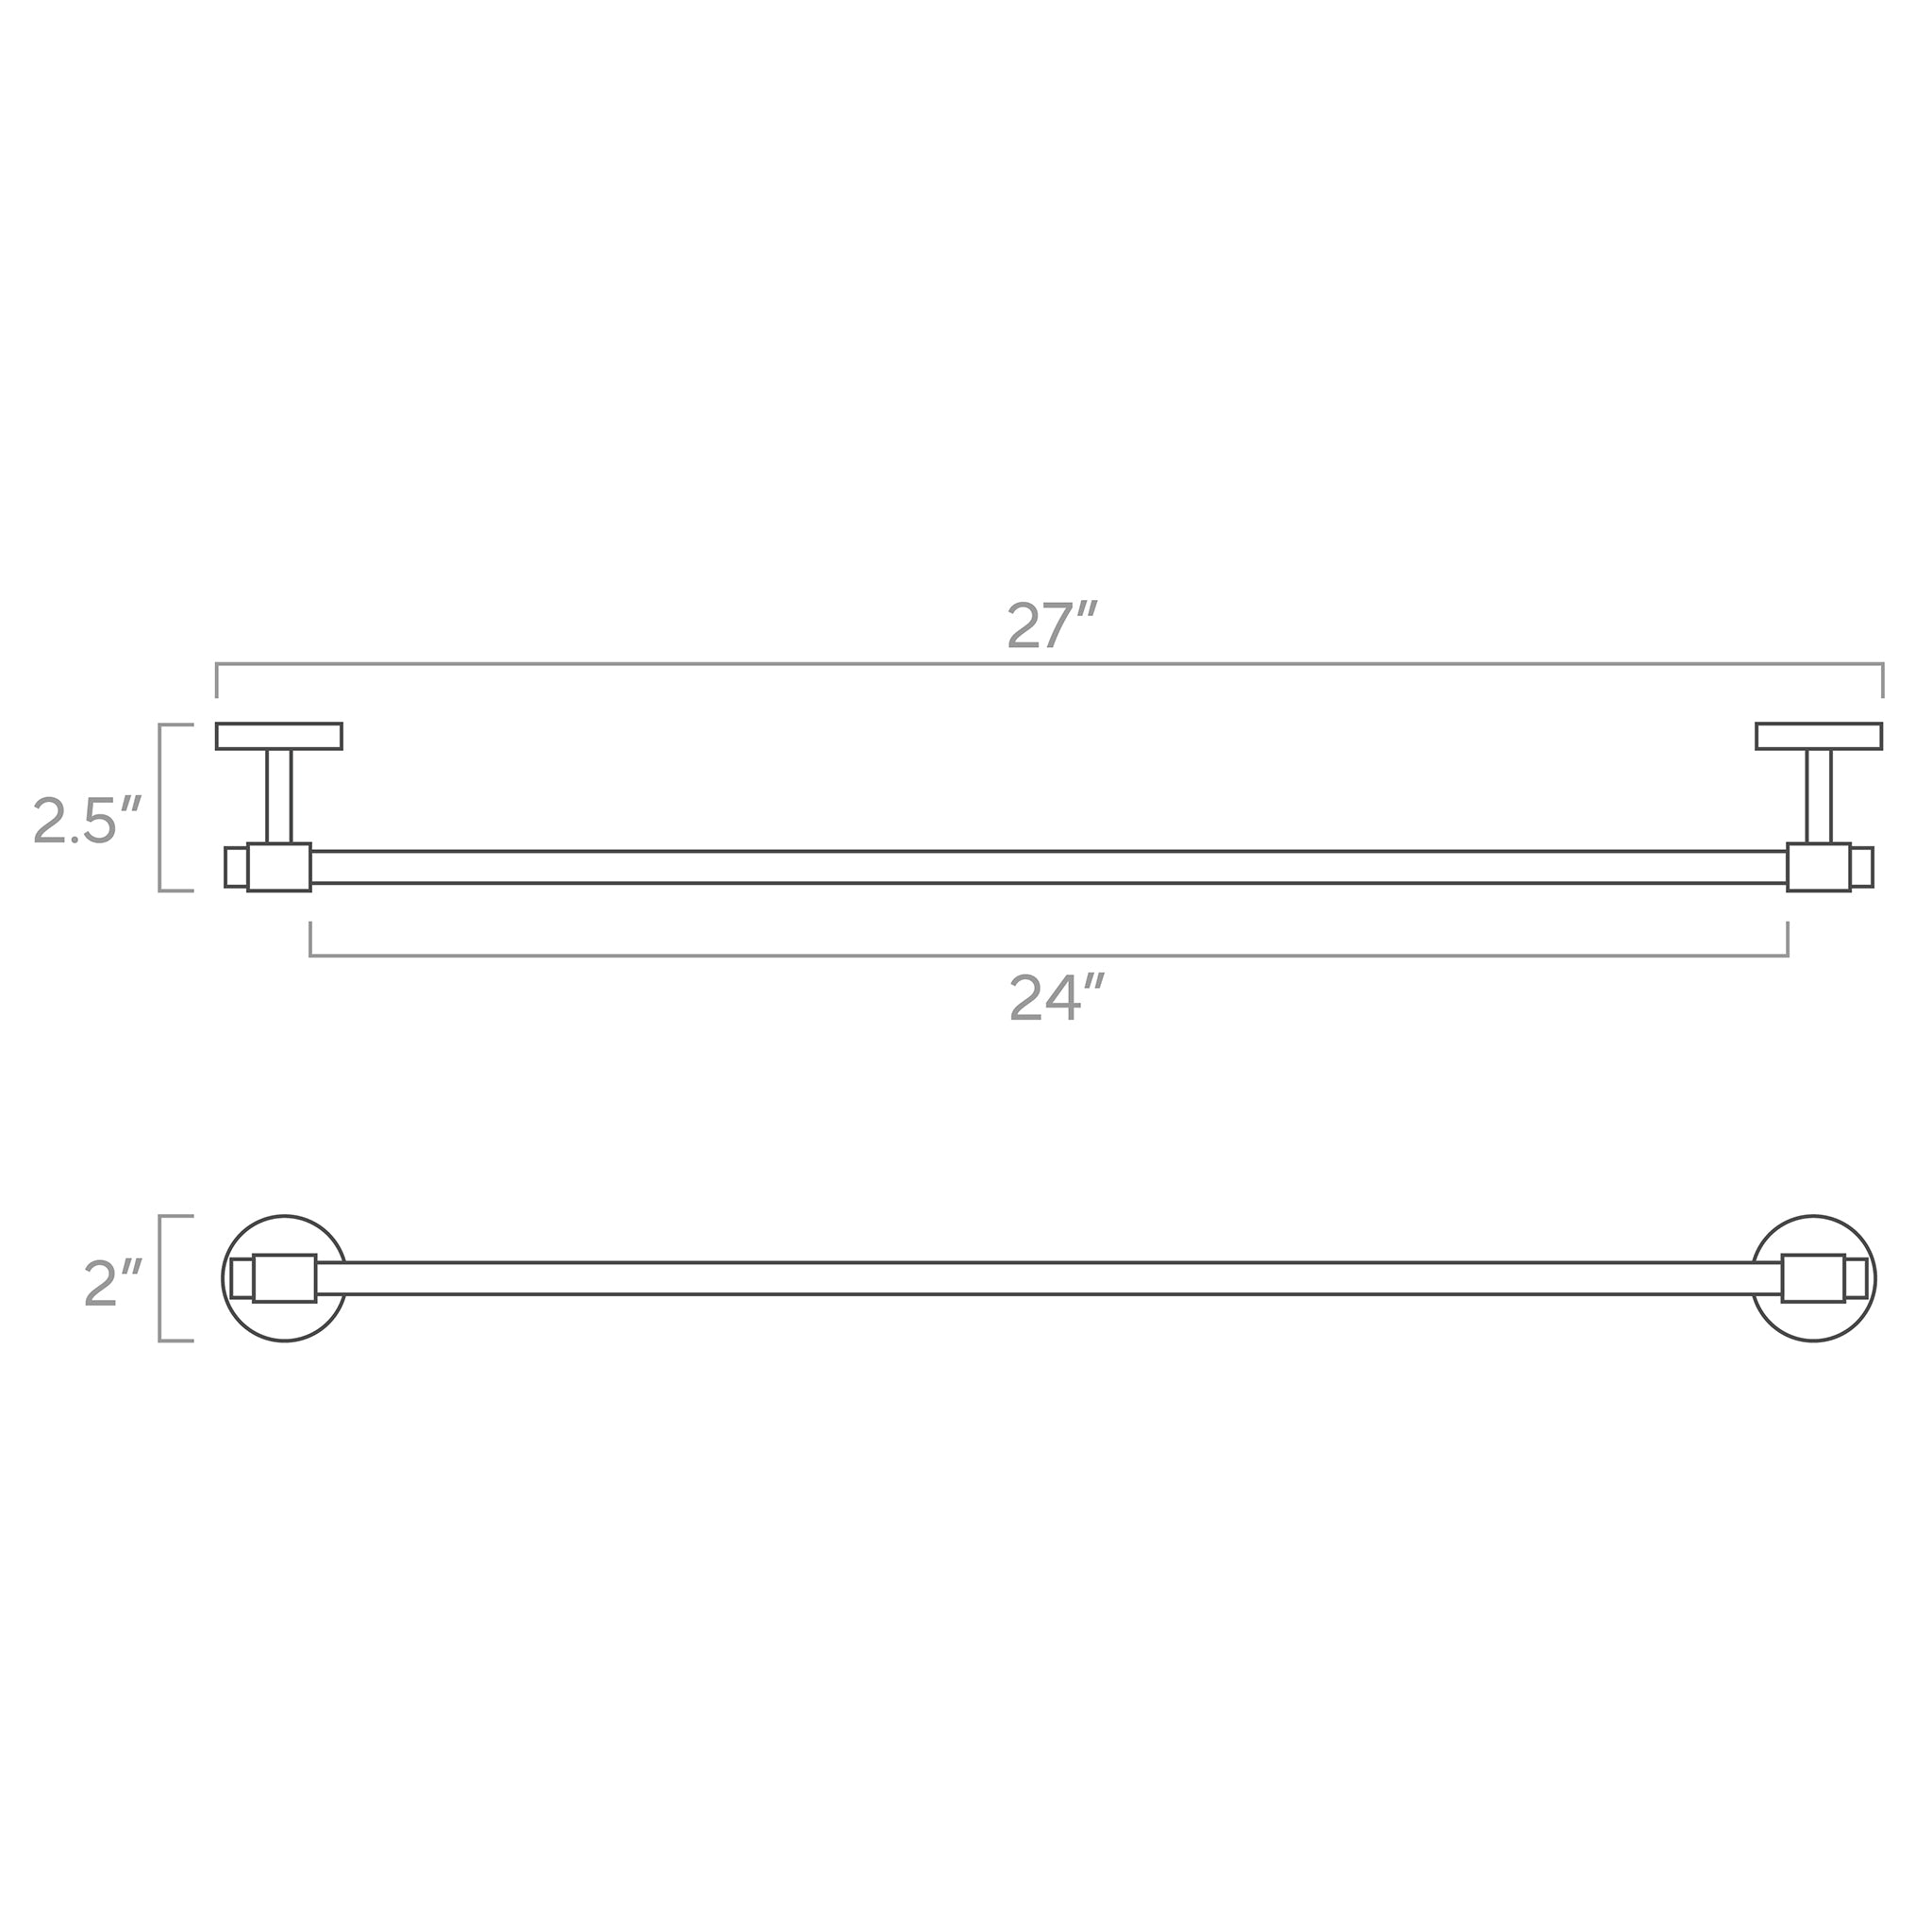 persona towel bar 24 inches ISO drawing, dutton brown hardware